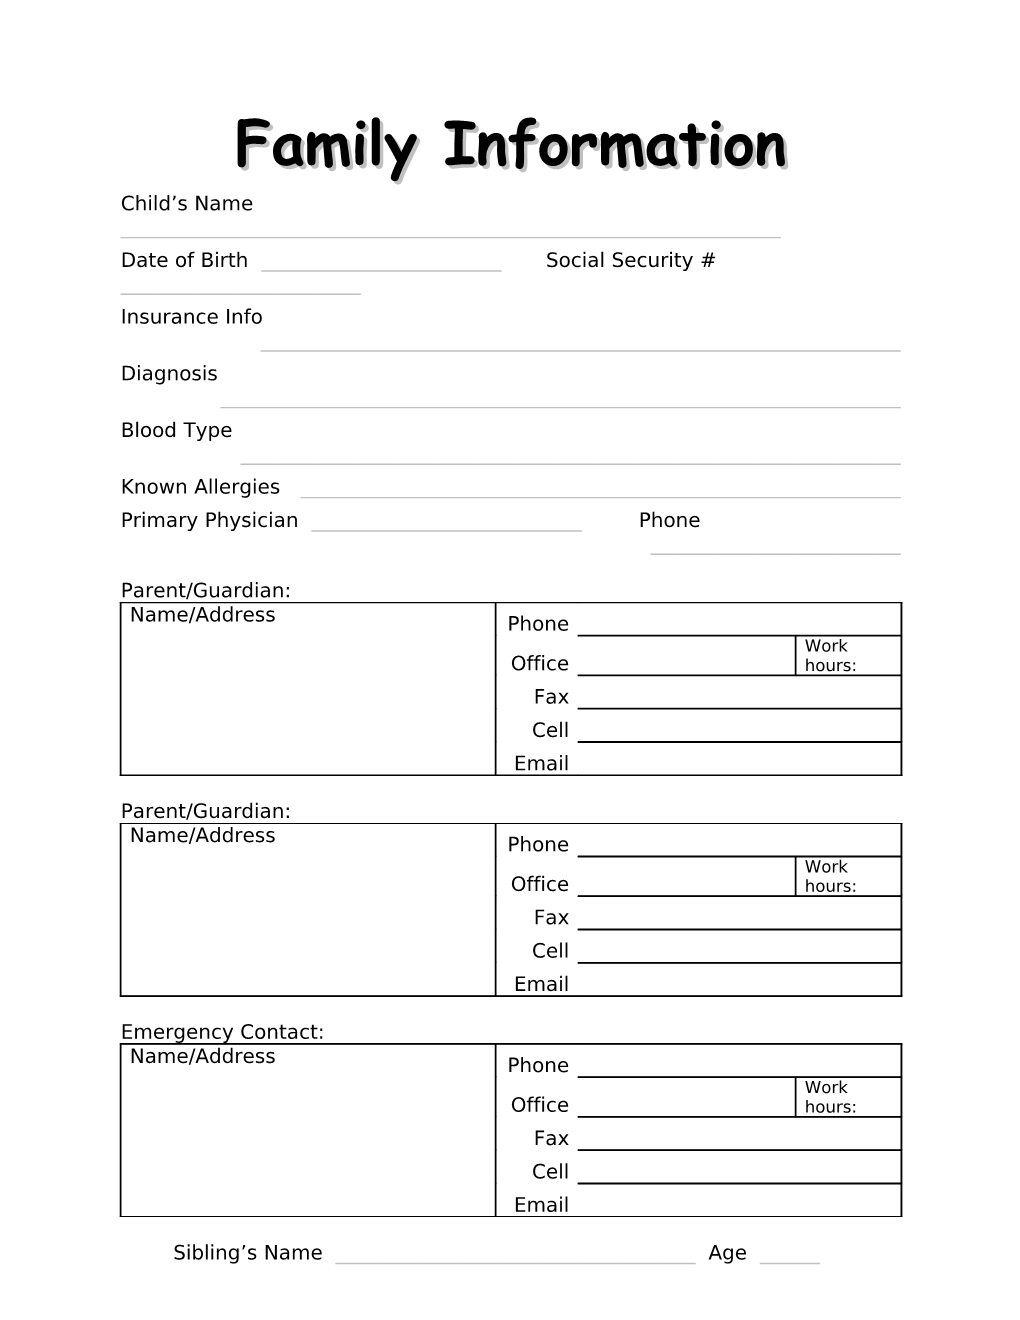 Family Information s1